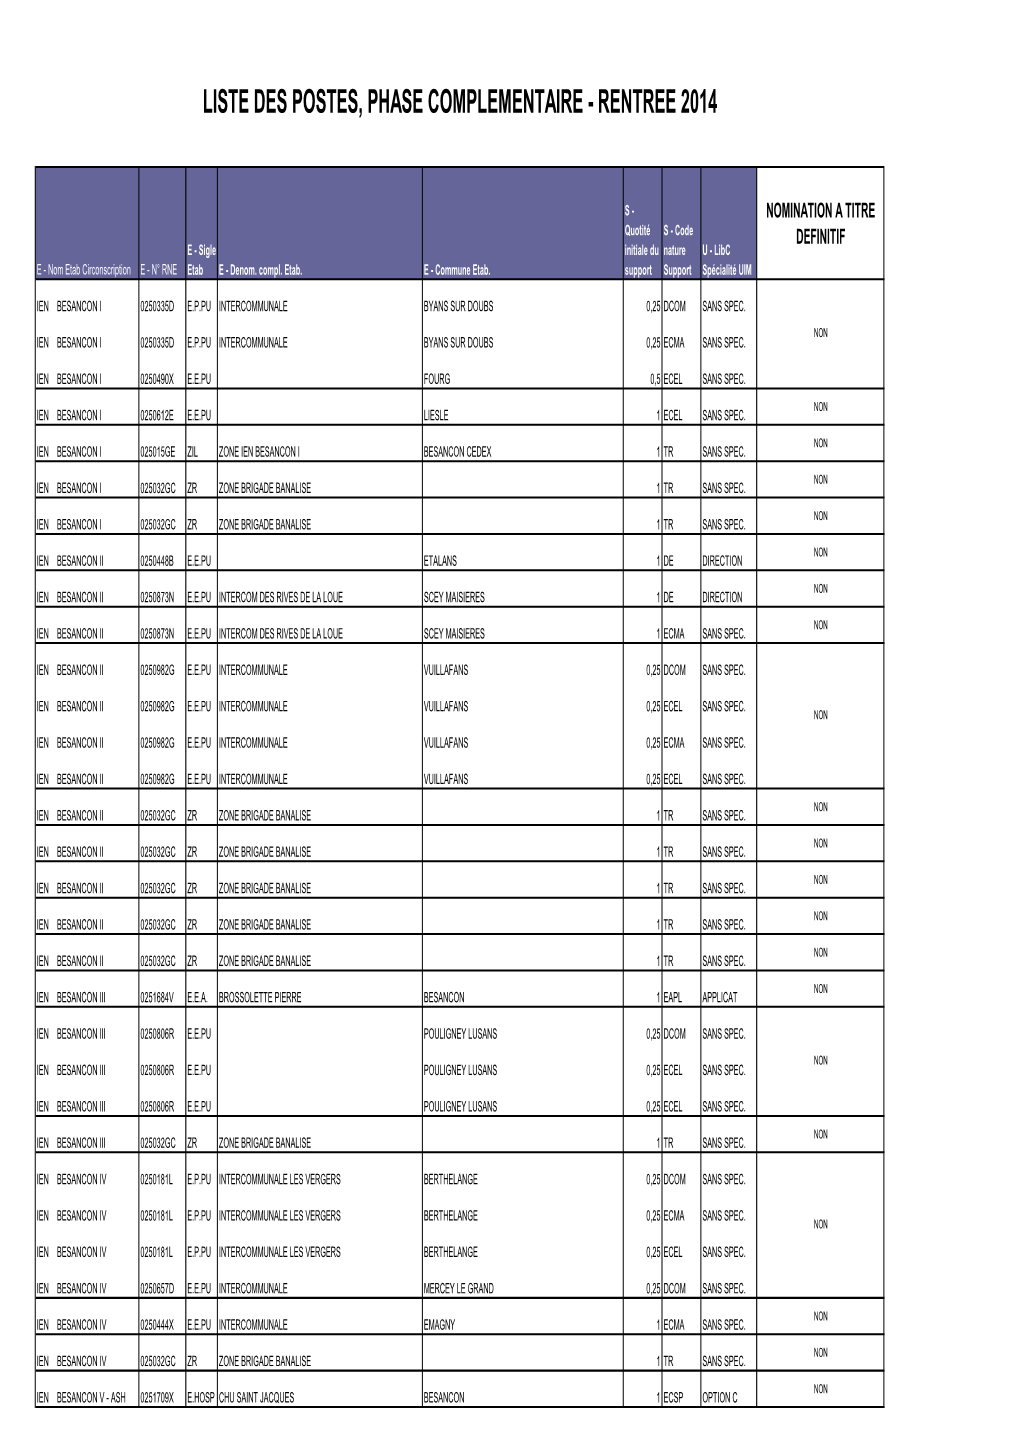 Liste Des Postes, Phase Complementaire - Rentree 2014